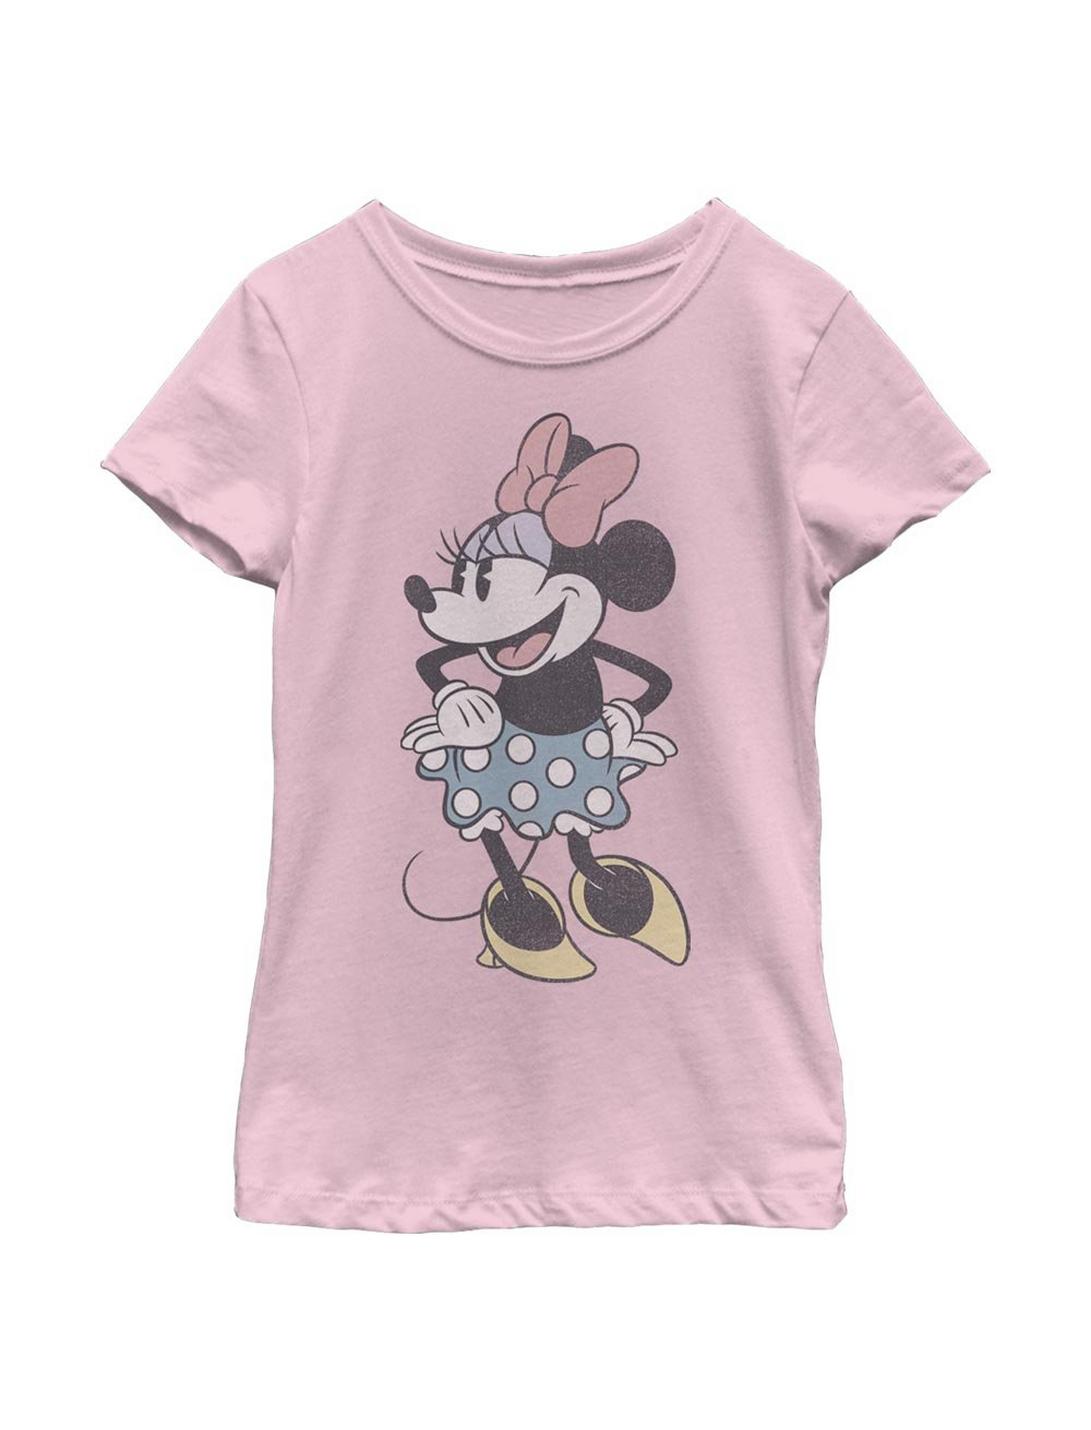 Disney Mickey Mouse Minnie Sass Youth Girls T-Shirt, PINK, hi-res